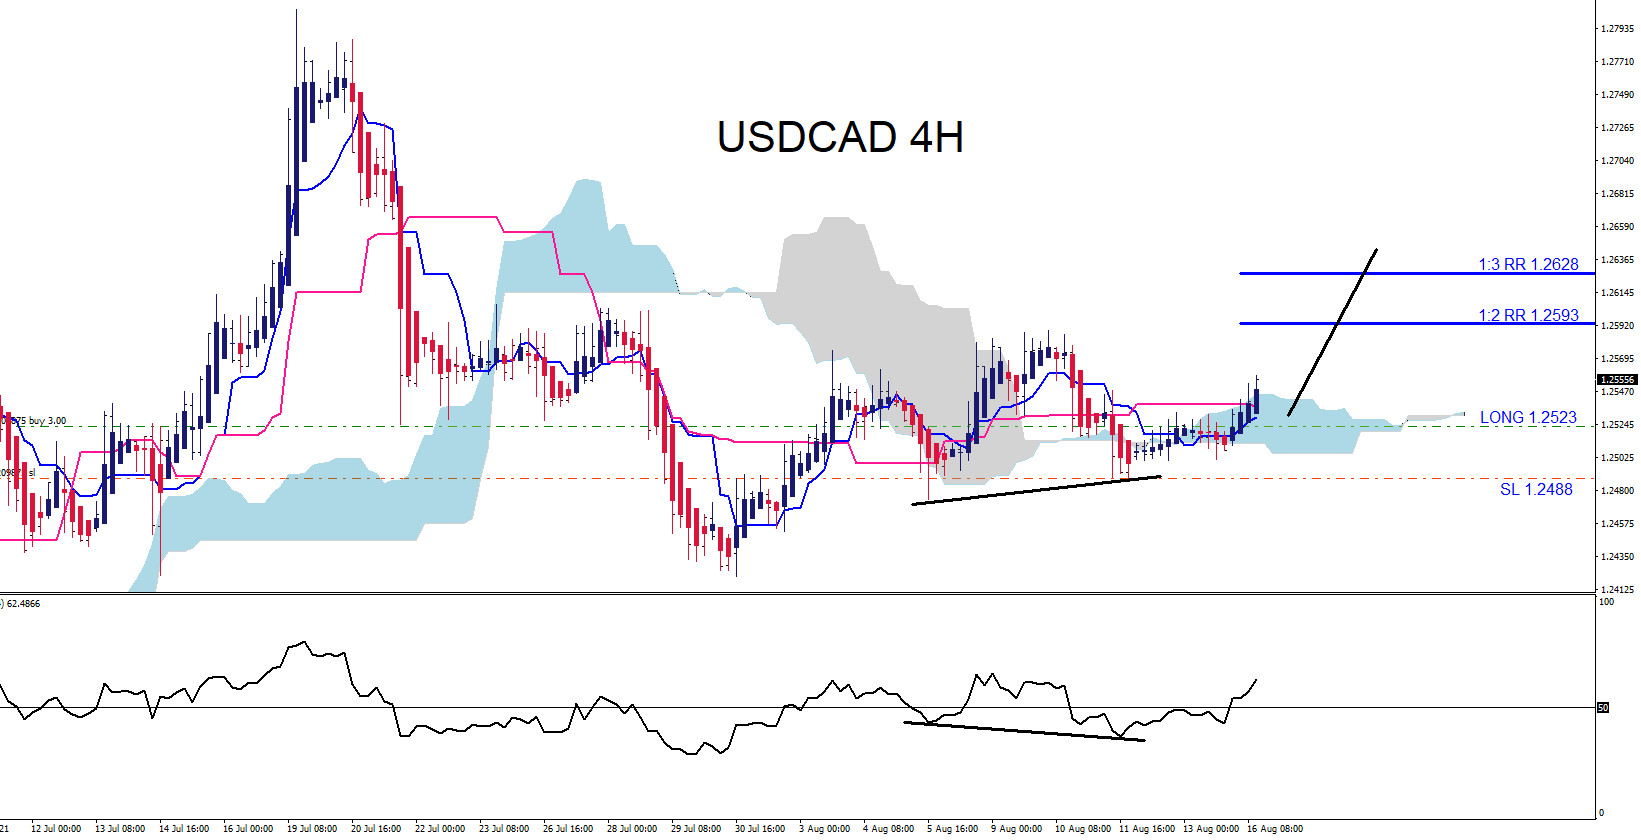 USDCAD Rallies Higher as Expected